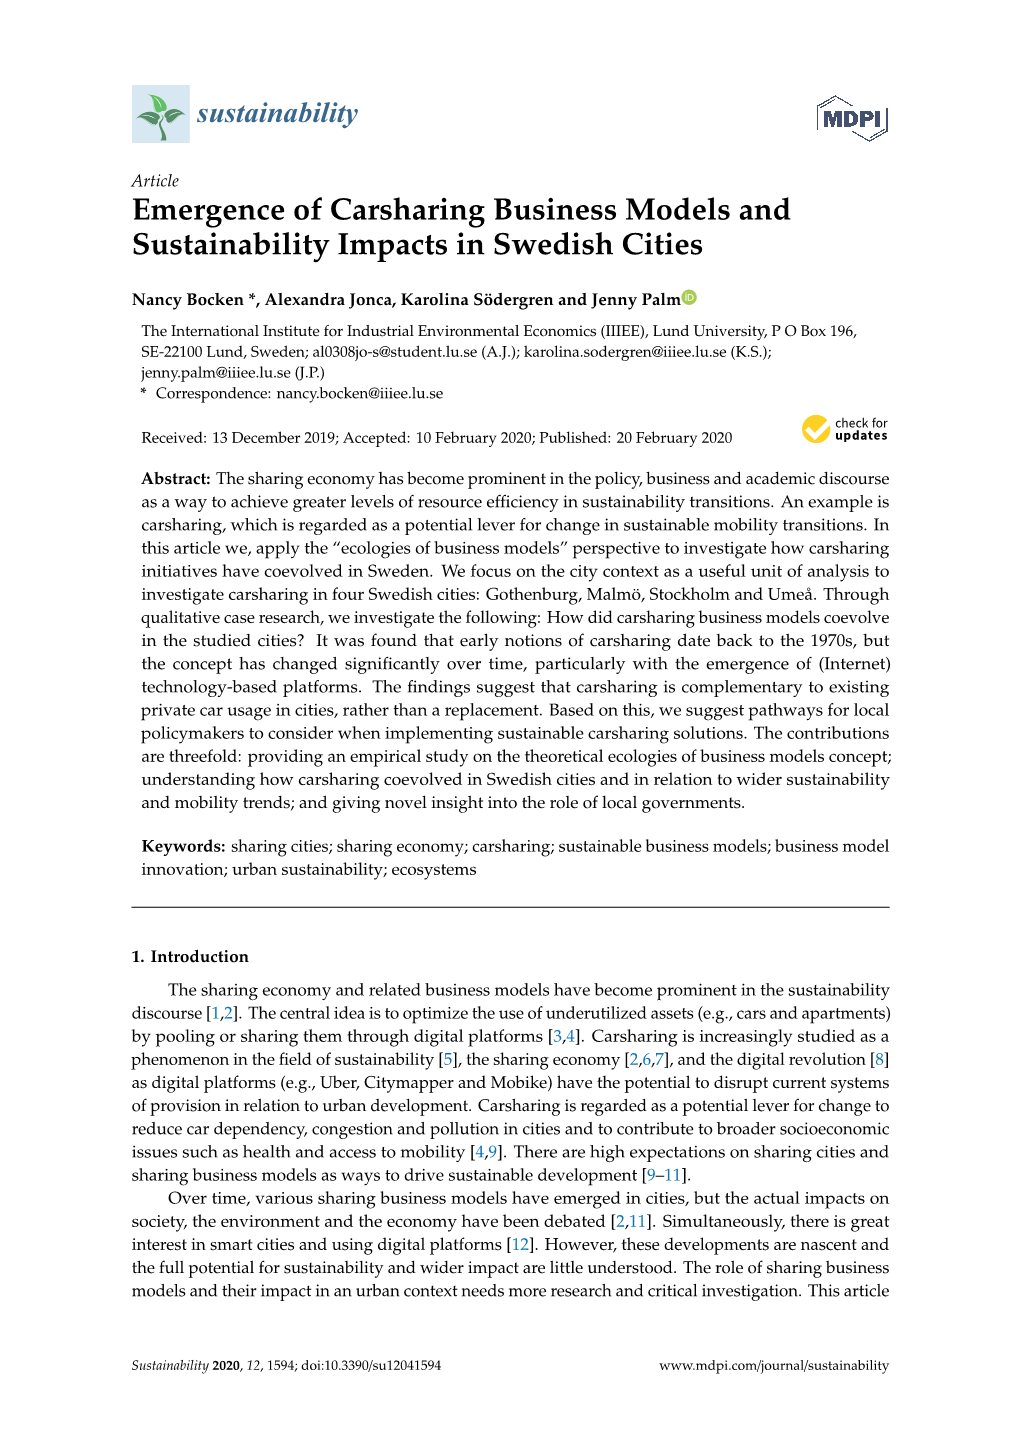 Emergence of Carsharing Business Models and Sustainability Impacts in Swedish Cities